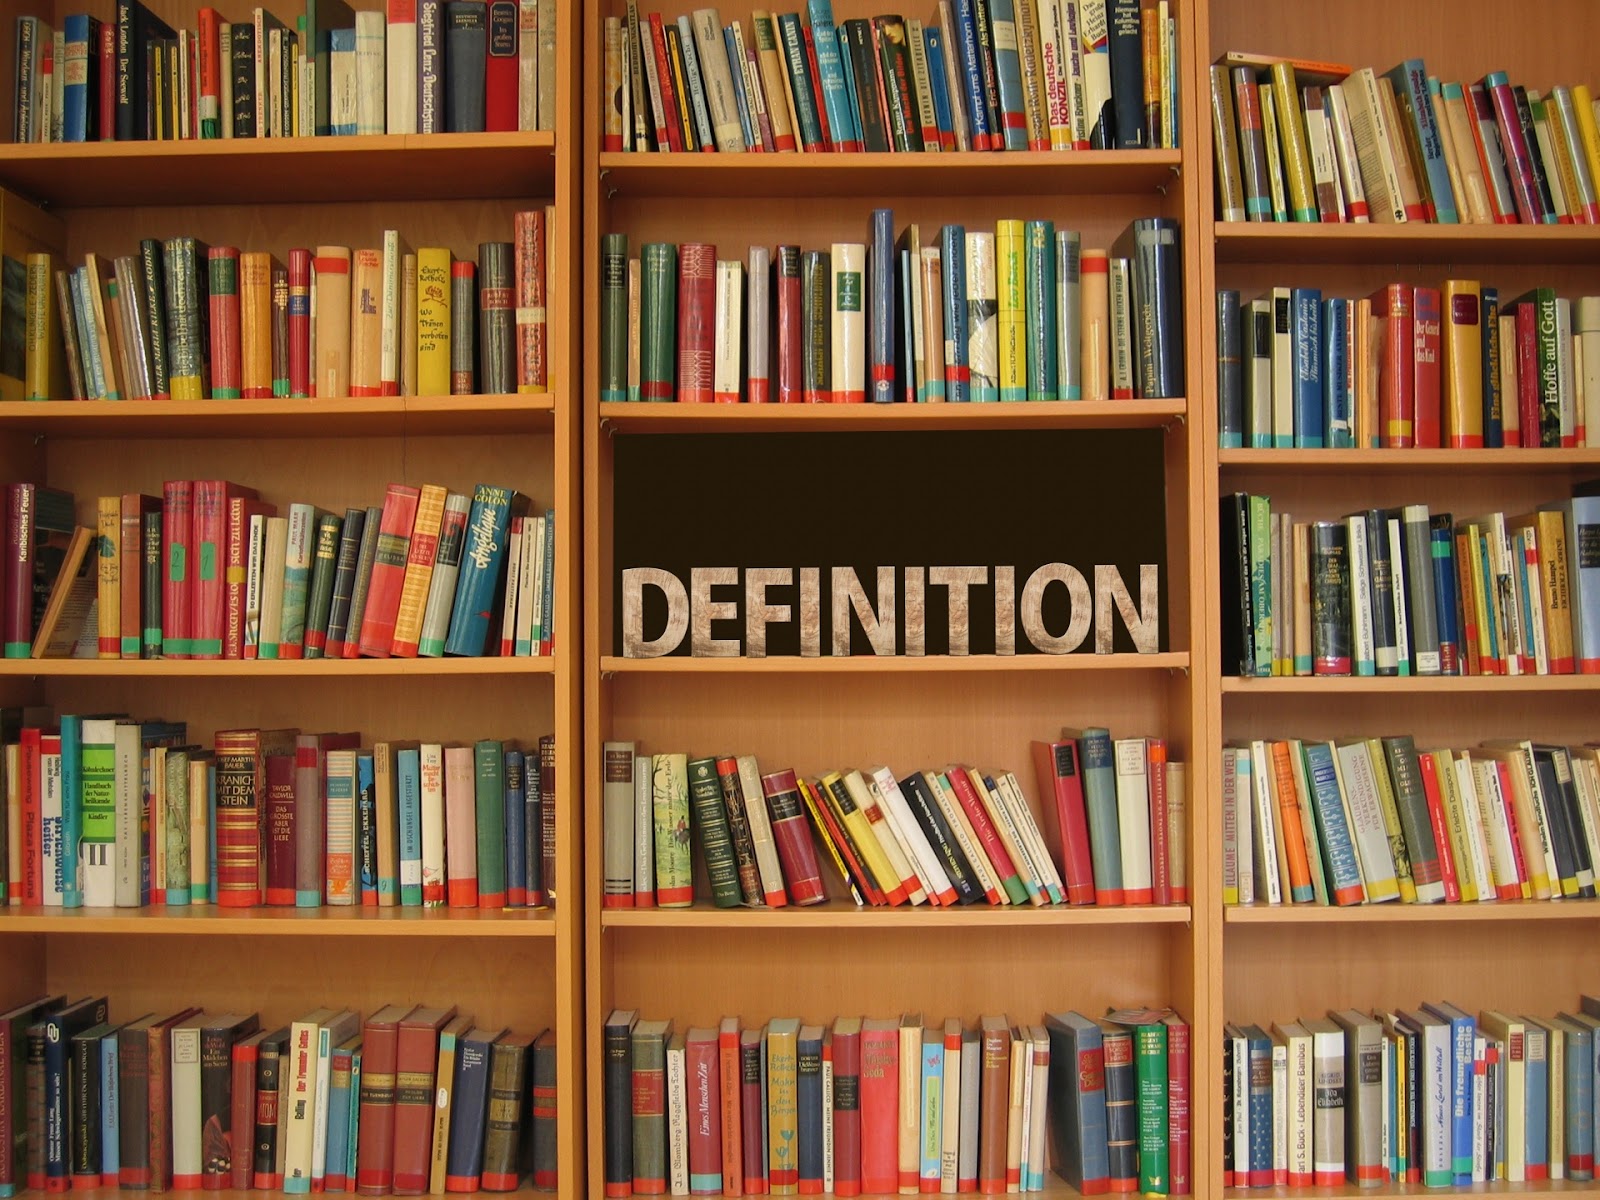 A library of books, with the word "definition" in the center.